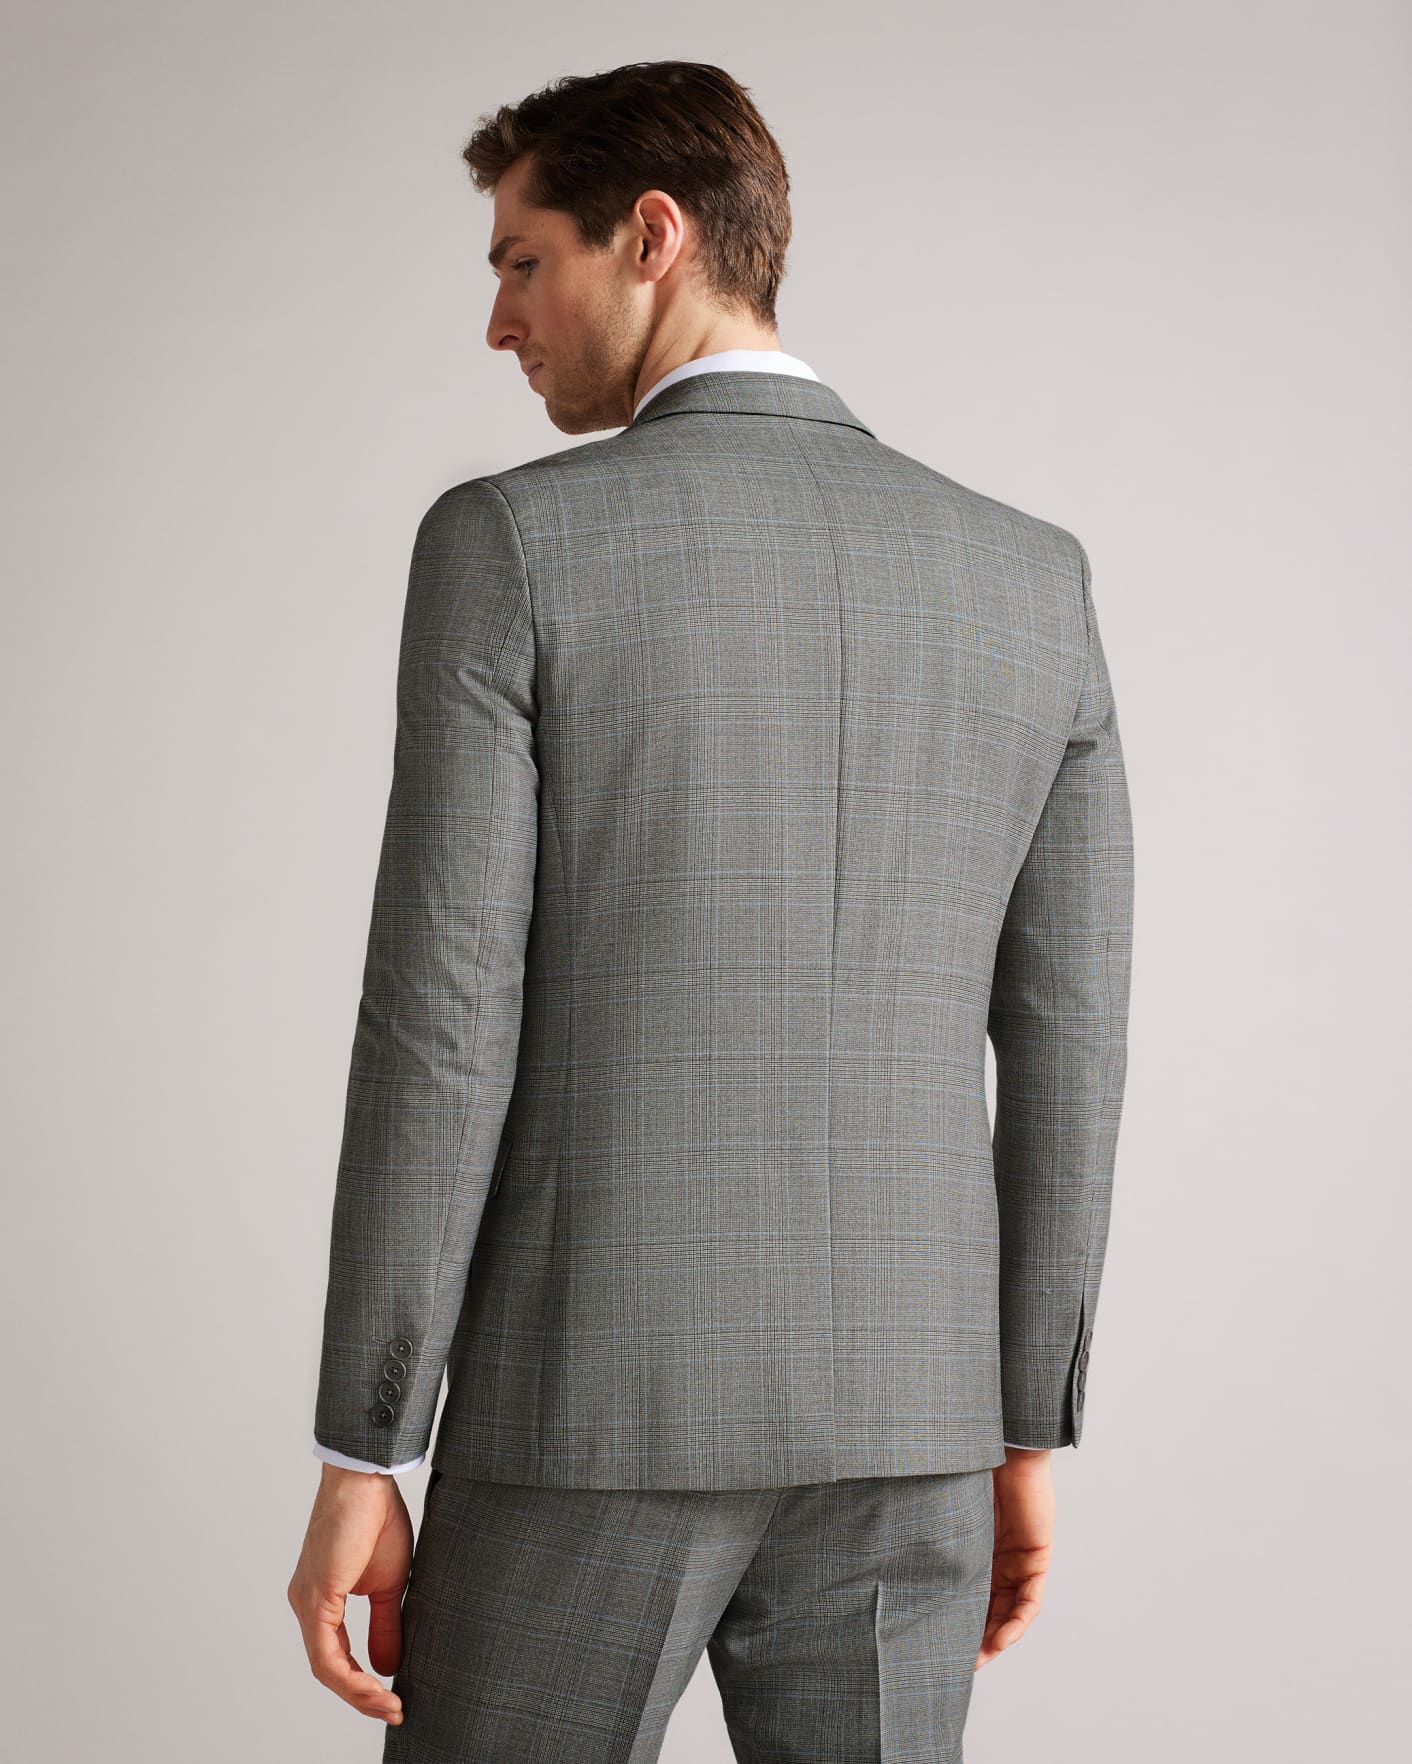 Mid Gray Slim Grey Blue Check Suit Jacket Ted Baker